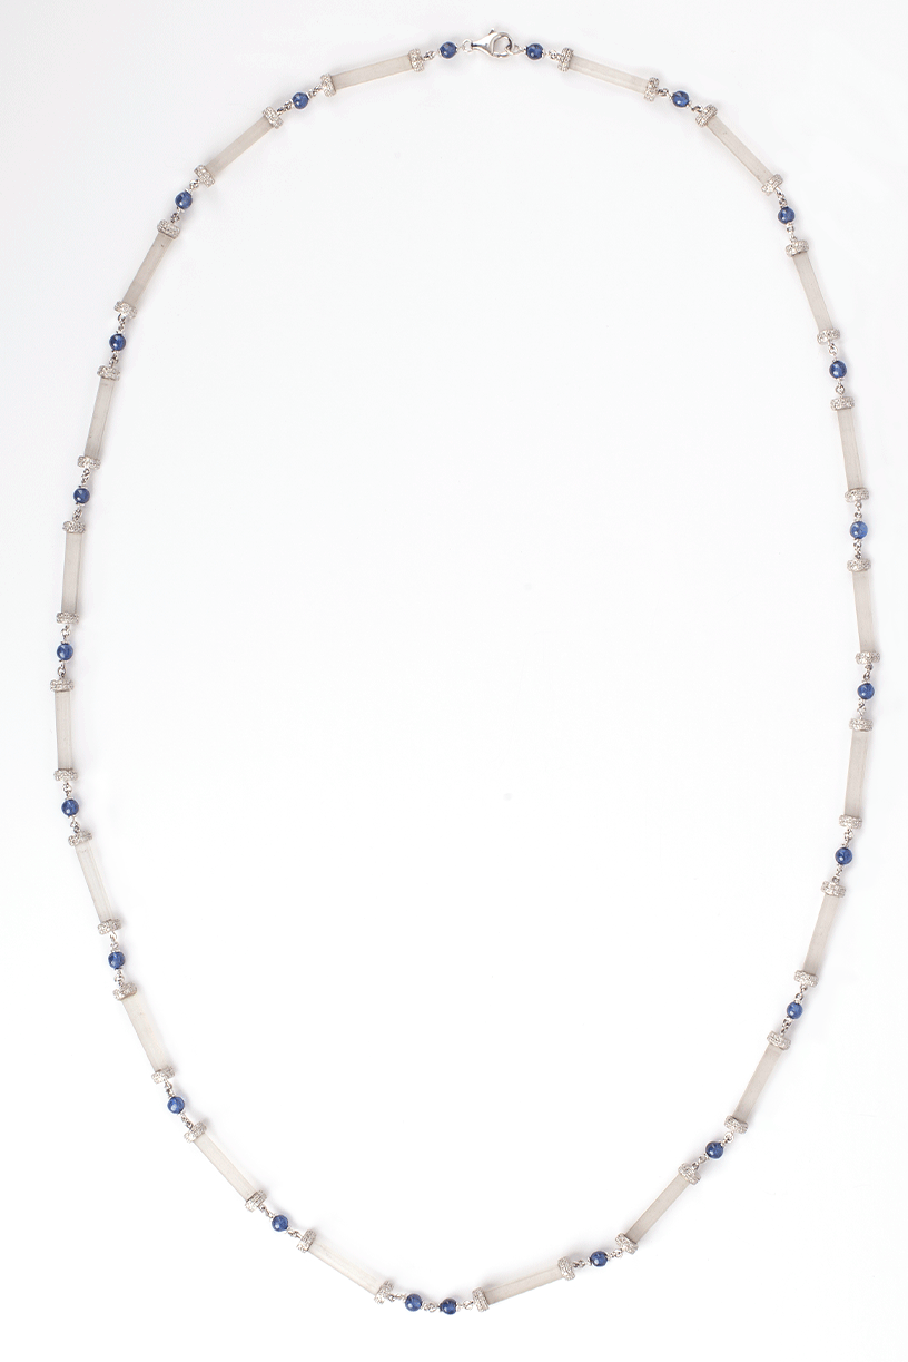 ARUNASHI-Crystal Necklace With Sapphire And Diamonds-WHITE GOLD